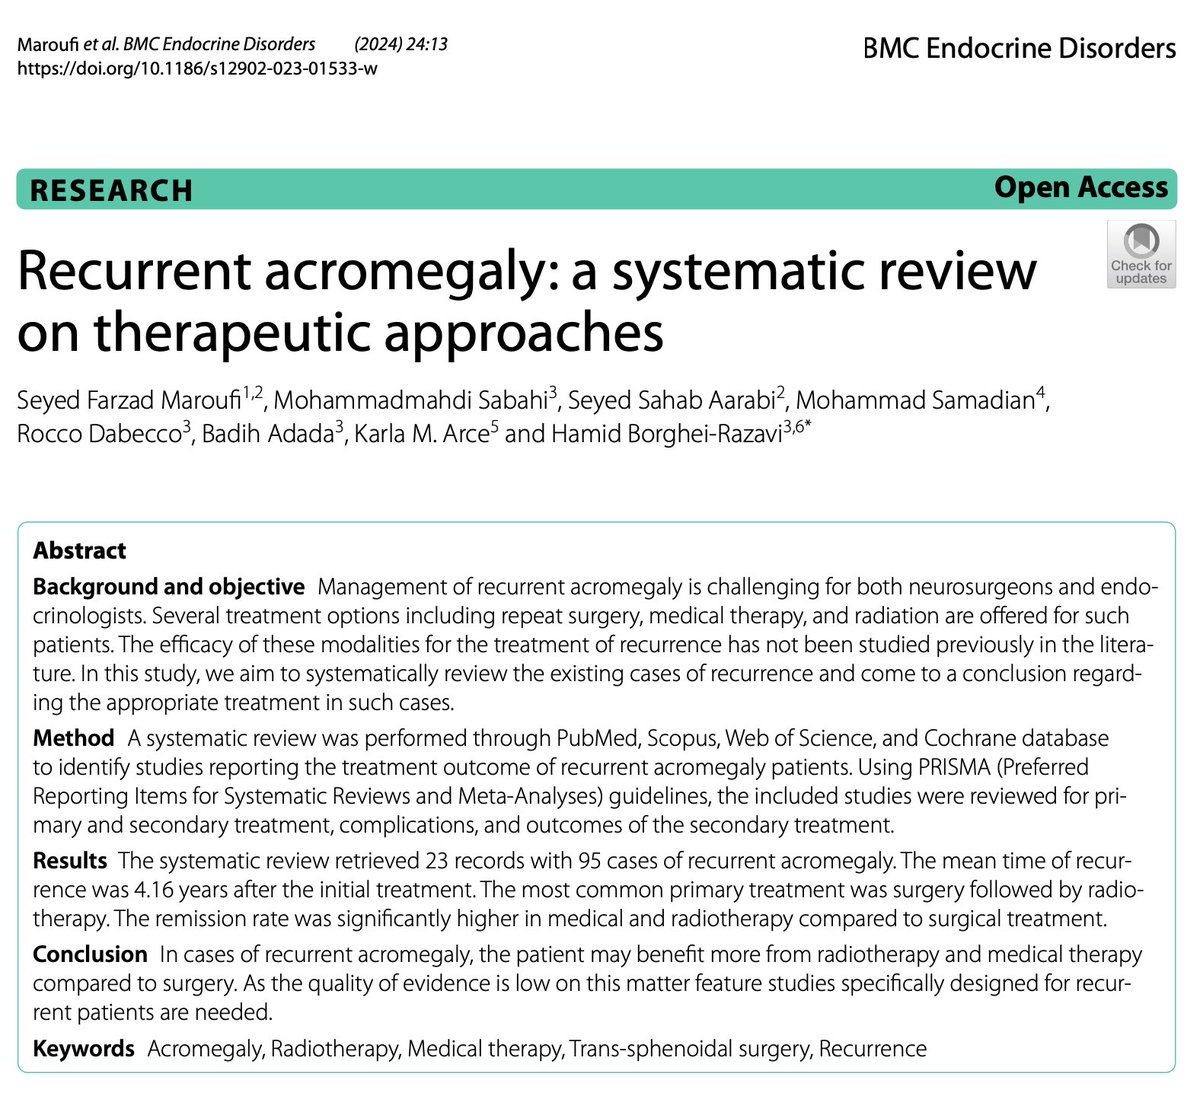 Solid work on therapeutic management of acromegaly published at @BioMedCentral. Proud of our dedicated team members who contributed to this publication @DrBadihAdada @BorgheiRazaviMD @m_m_sbh #Karla_Arce #Rocco_Dabecco @CleveClinicFL 🔗 bmcendocrdisord.biomedcentral.com/articles/10.11…